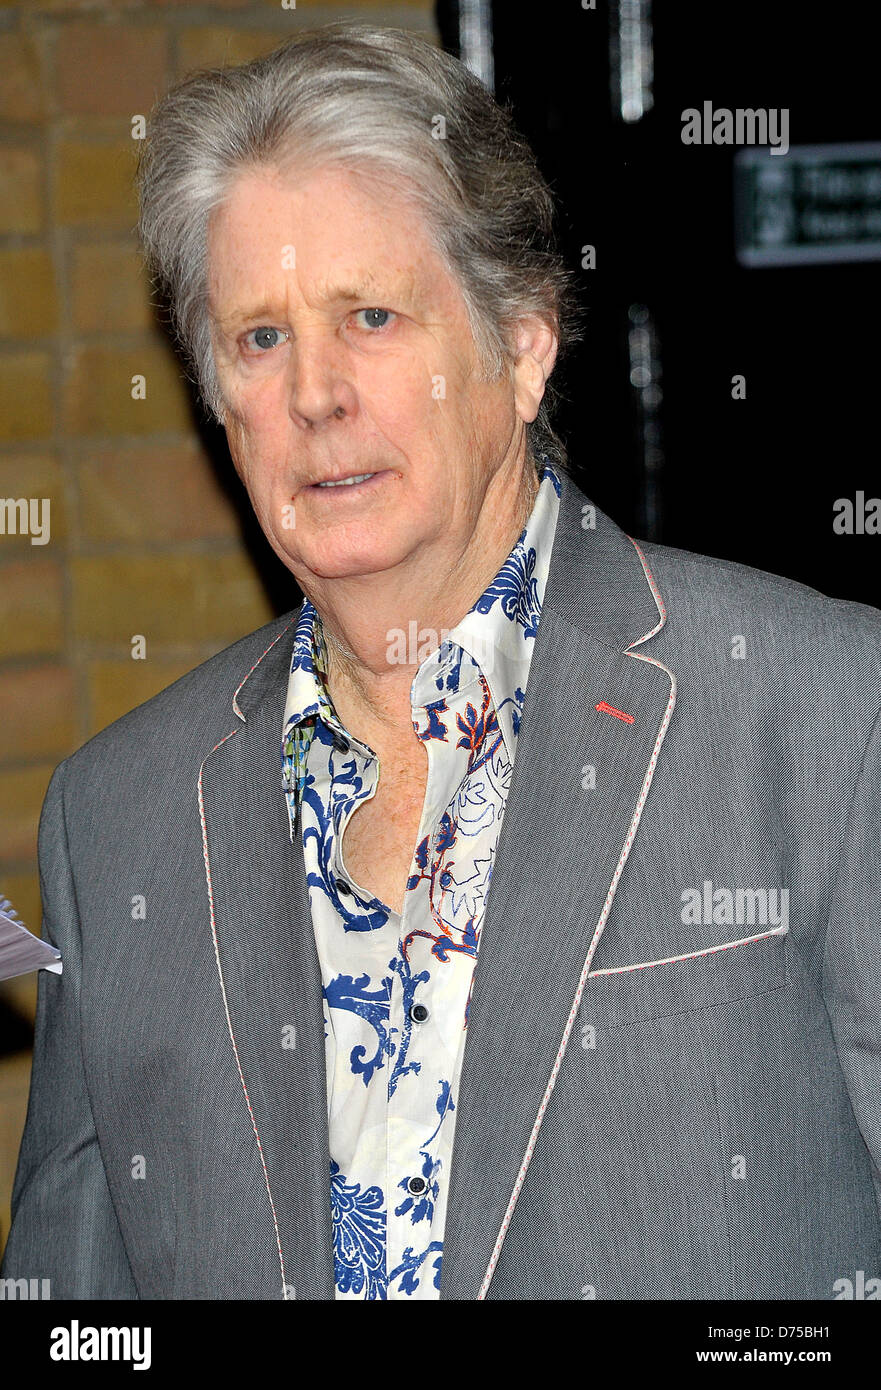 Brian Wilson Glenfiddich Mojo Honours List 2011 Awards Ceremony, held at The Brewery - Arrivals London, England - 21.07.11 Stock Photo